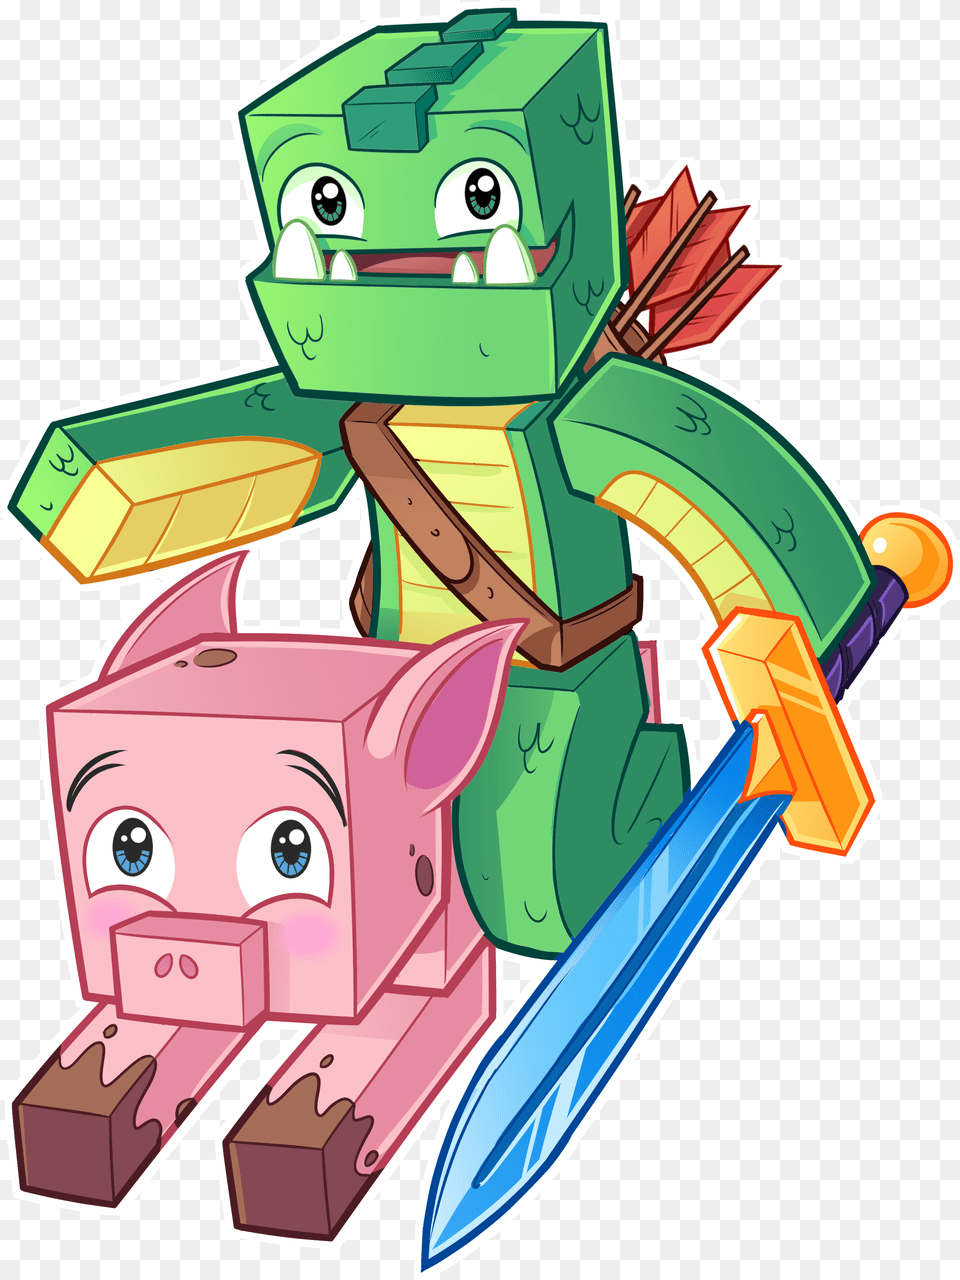 Welcome To Eckocraft Server Store Here You Can Purchase Eckosoldier Shirt, Bulldozer, Machine, Book, Comics Free Transparent Png